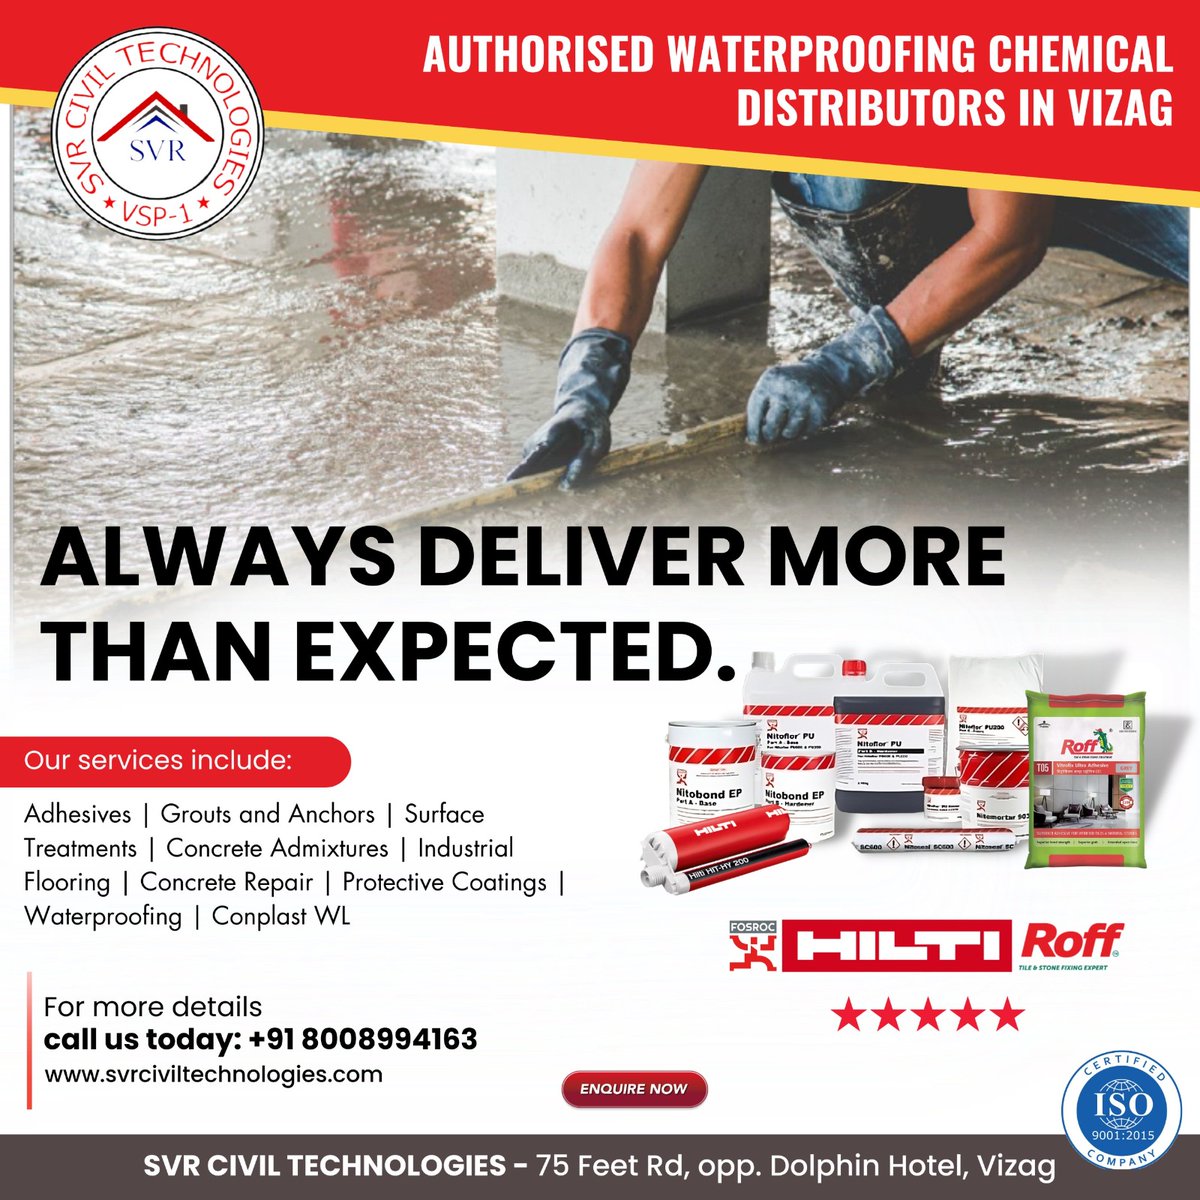 '🏗️🌊 For all your waterproofing needs in Vizag, trust our authorized distribution!

Contact us: +91 8008994163
📍 Location: SVR CIVIL TECHNOLOGIES, 75 Feet Rd, opp. Dolphin Hotel, Vizag

#WaterproofingChemicals  #Grouts #SurfaceTreatments #ConcreteRepair  
#QualityServices